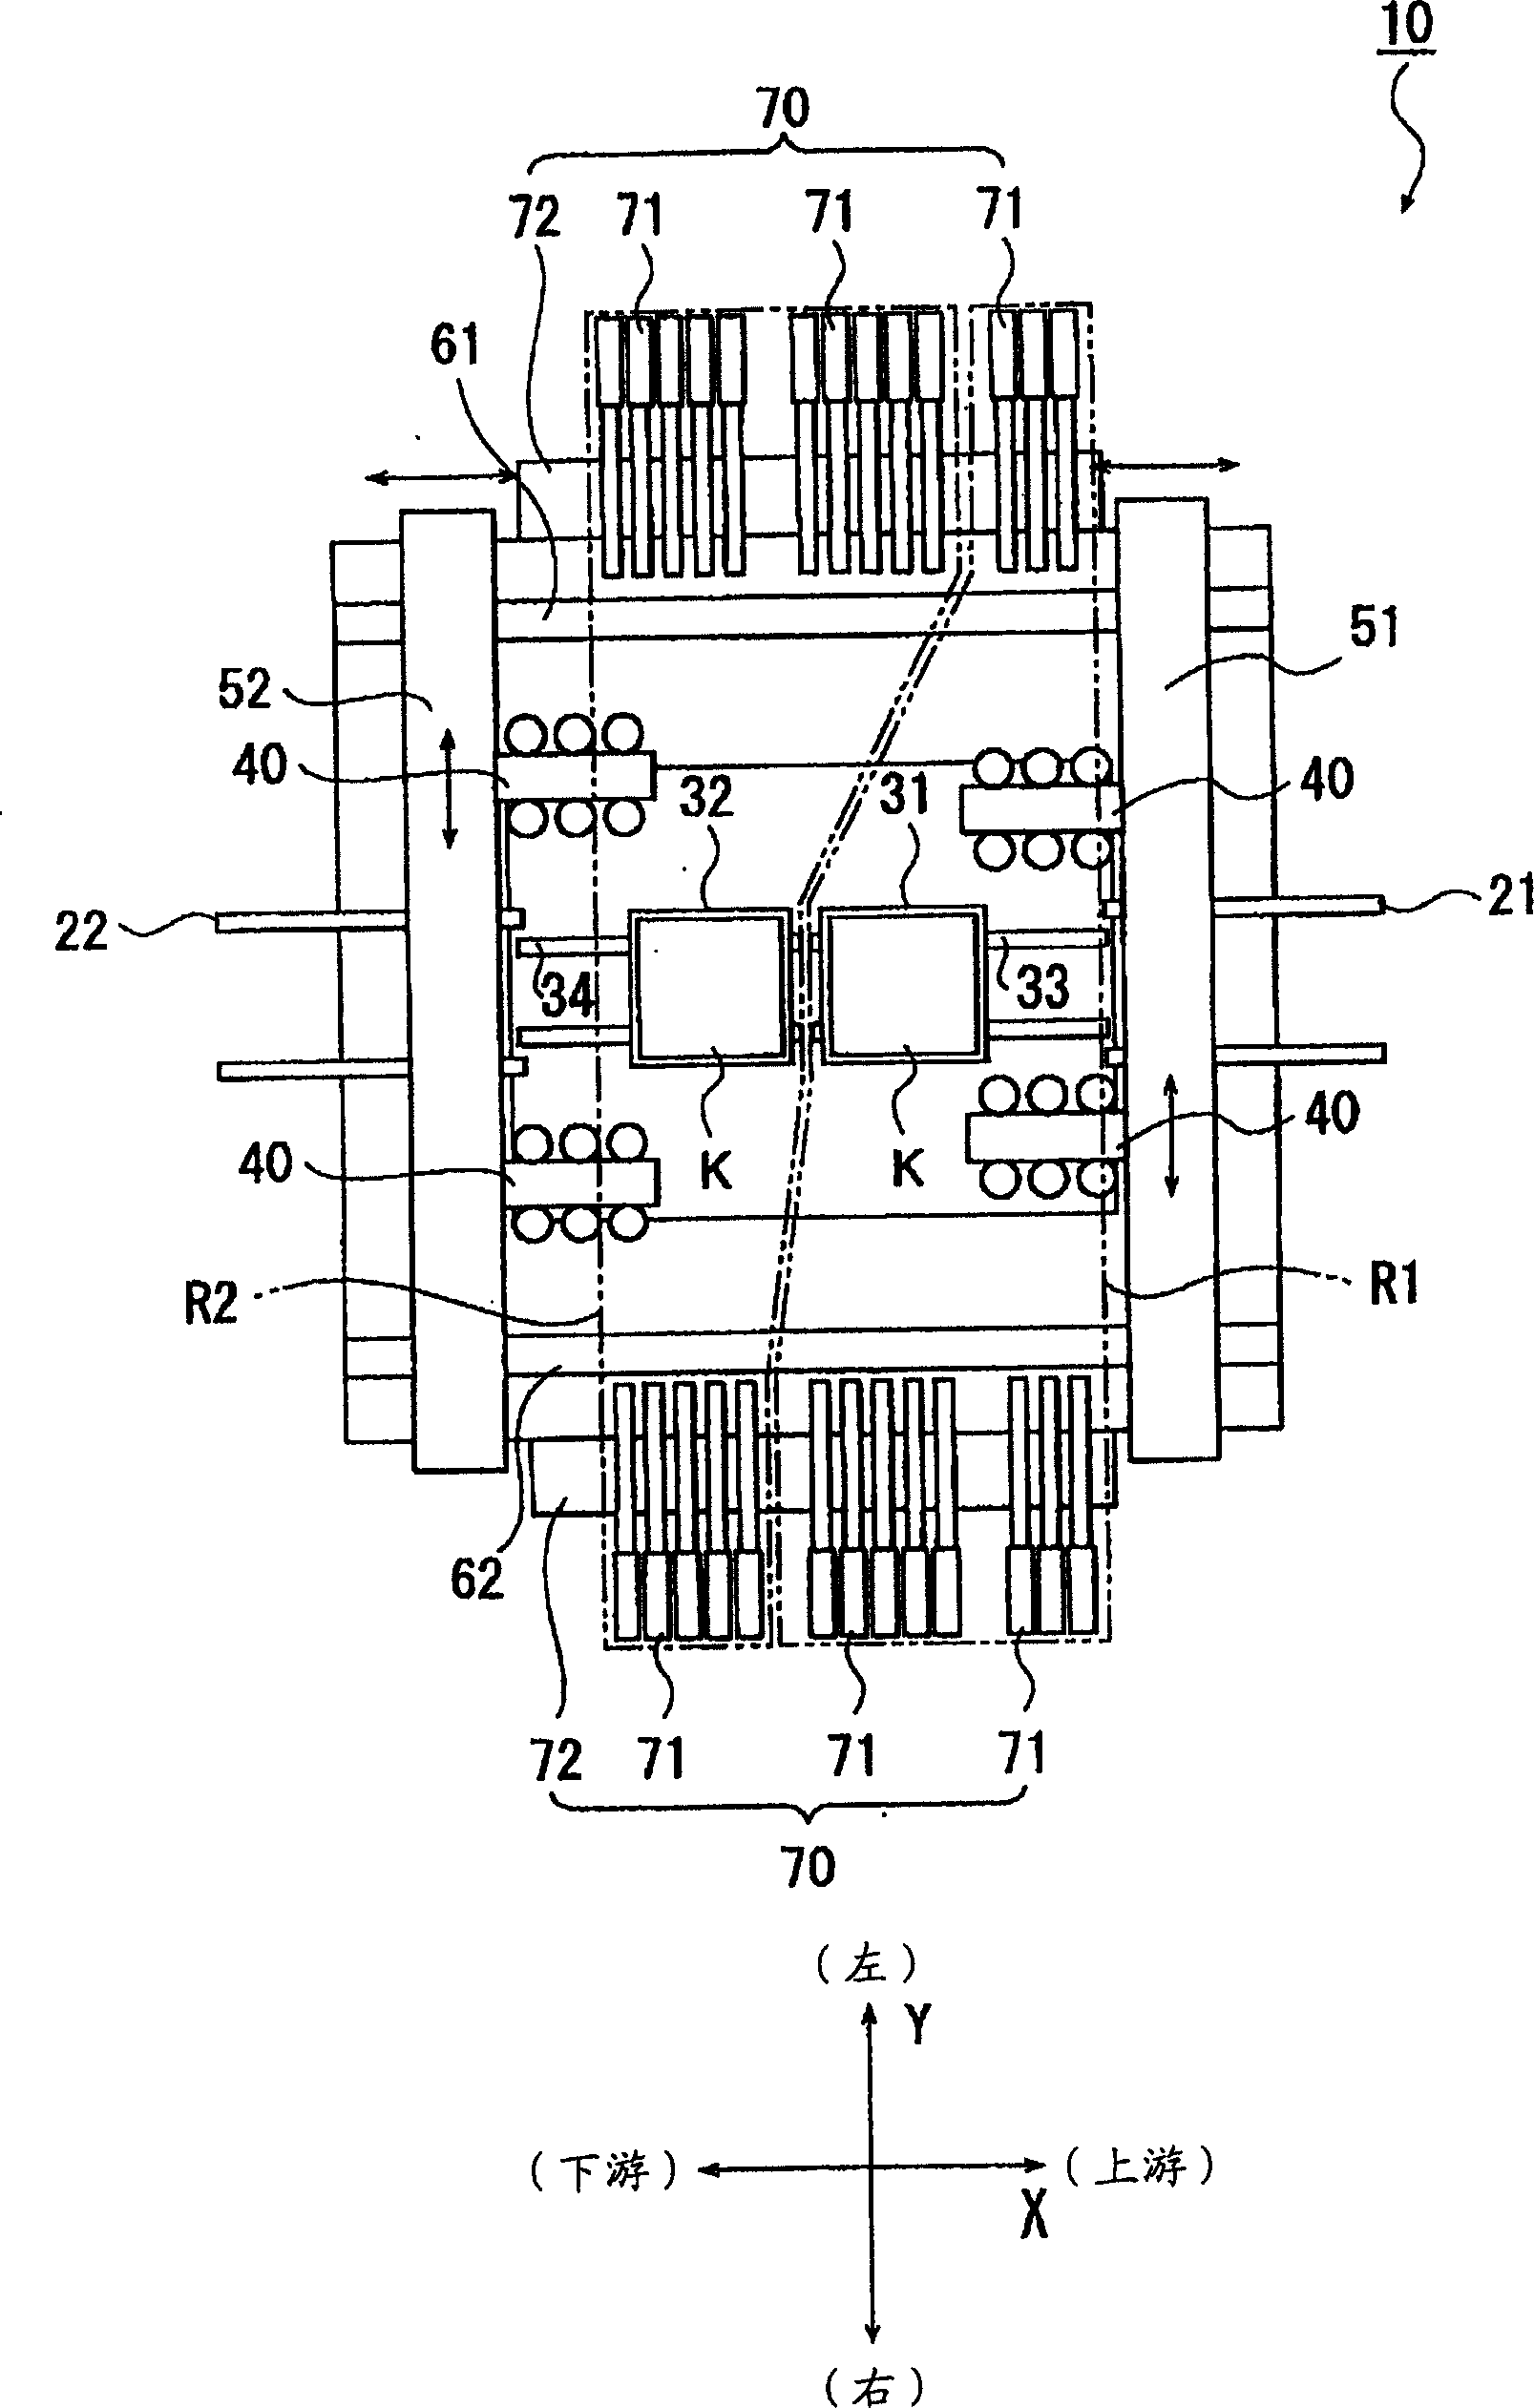 Electronic parts installation device